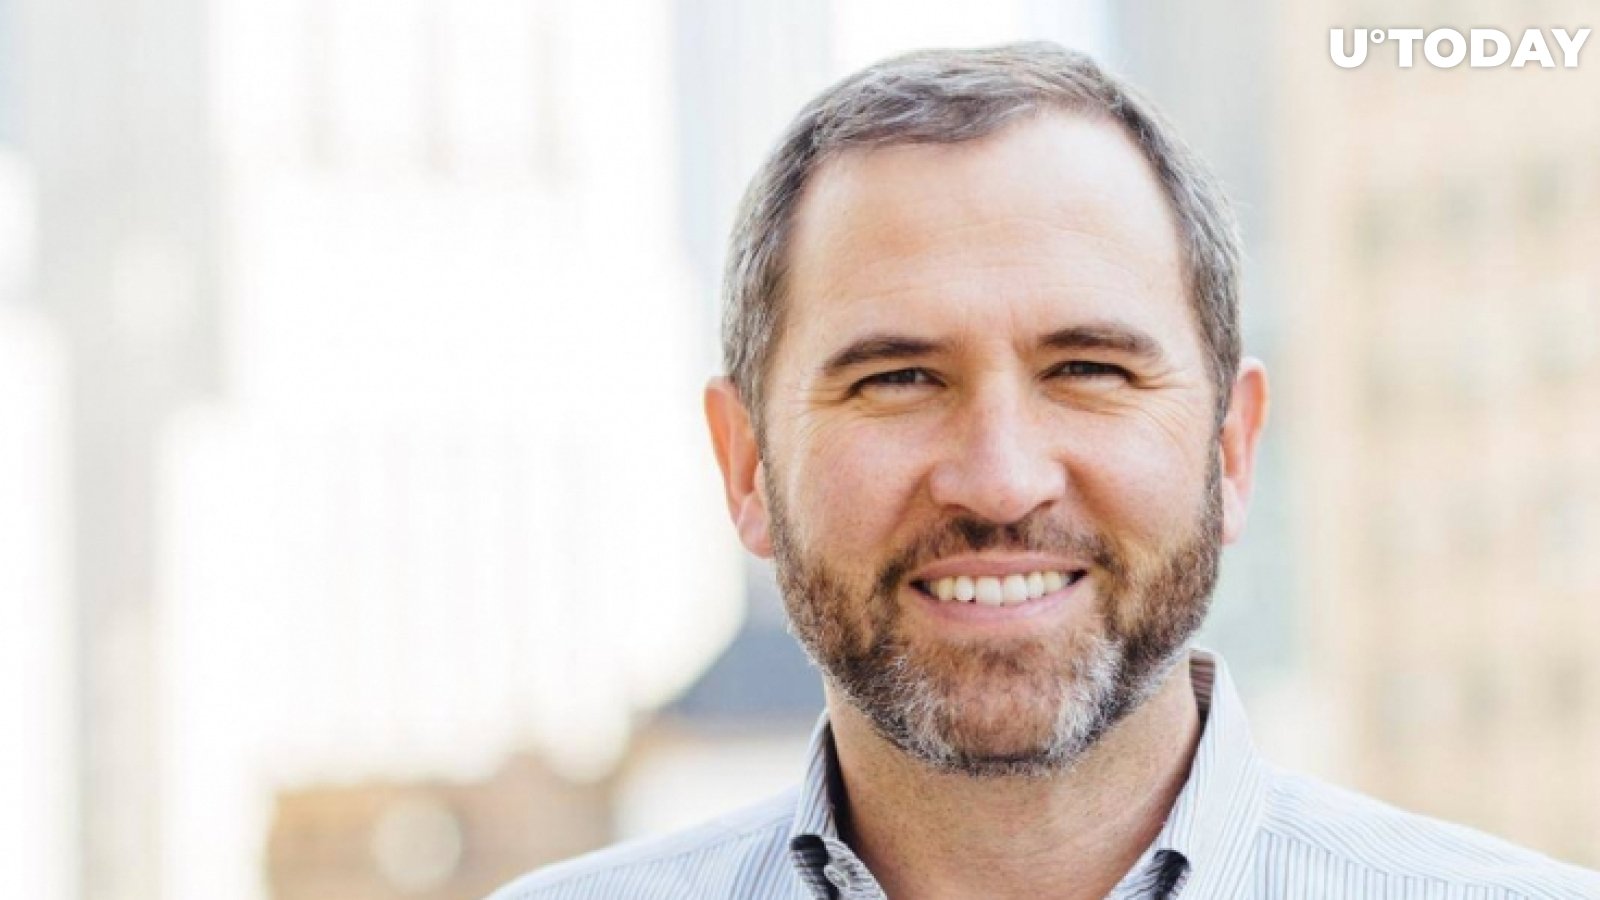 Ripple CEO Brad Garlinghouse Claims That Fed’s Inflation Shift Is Good for Crypto